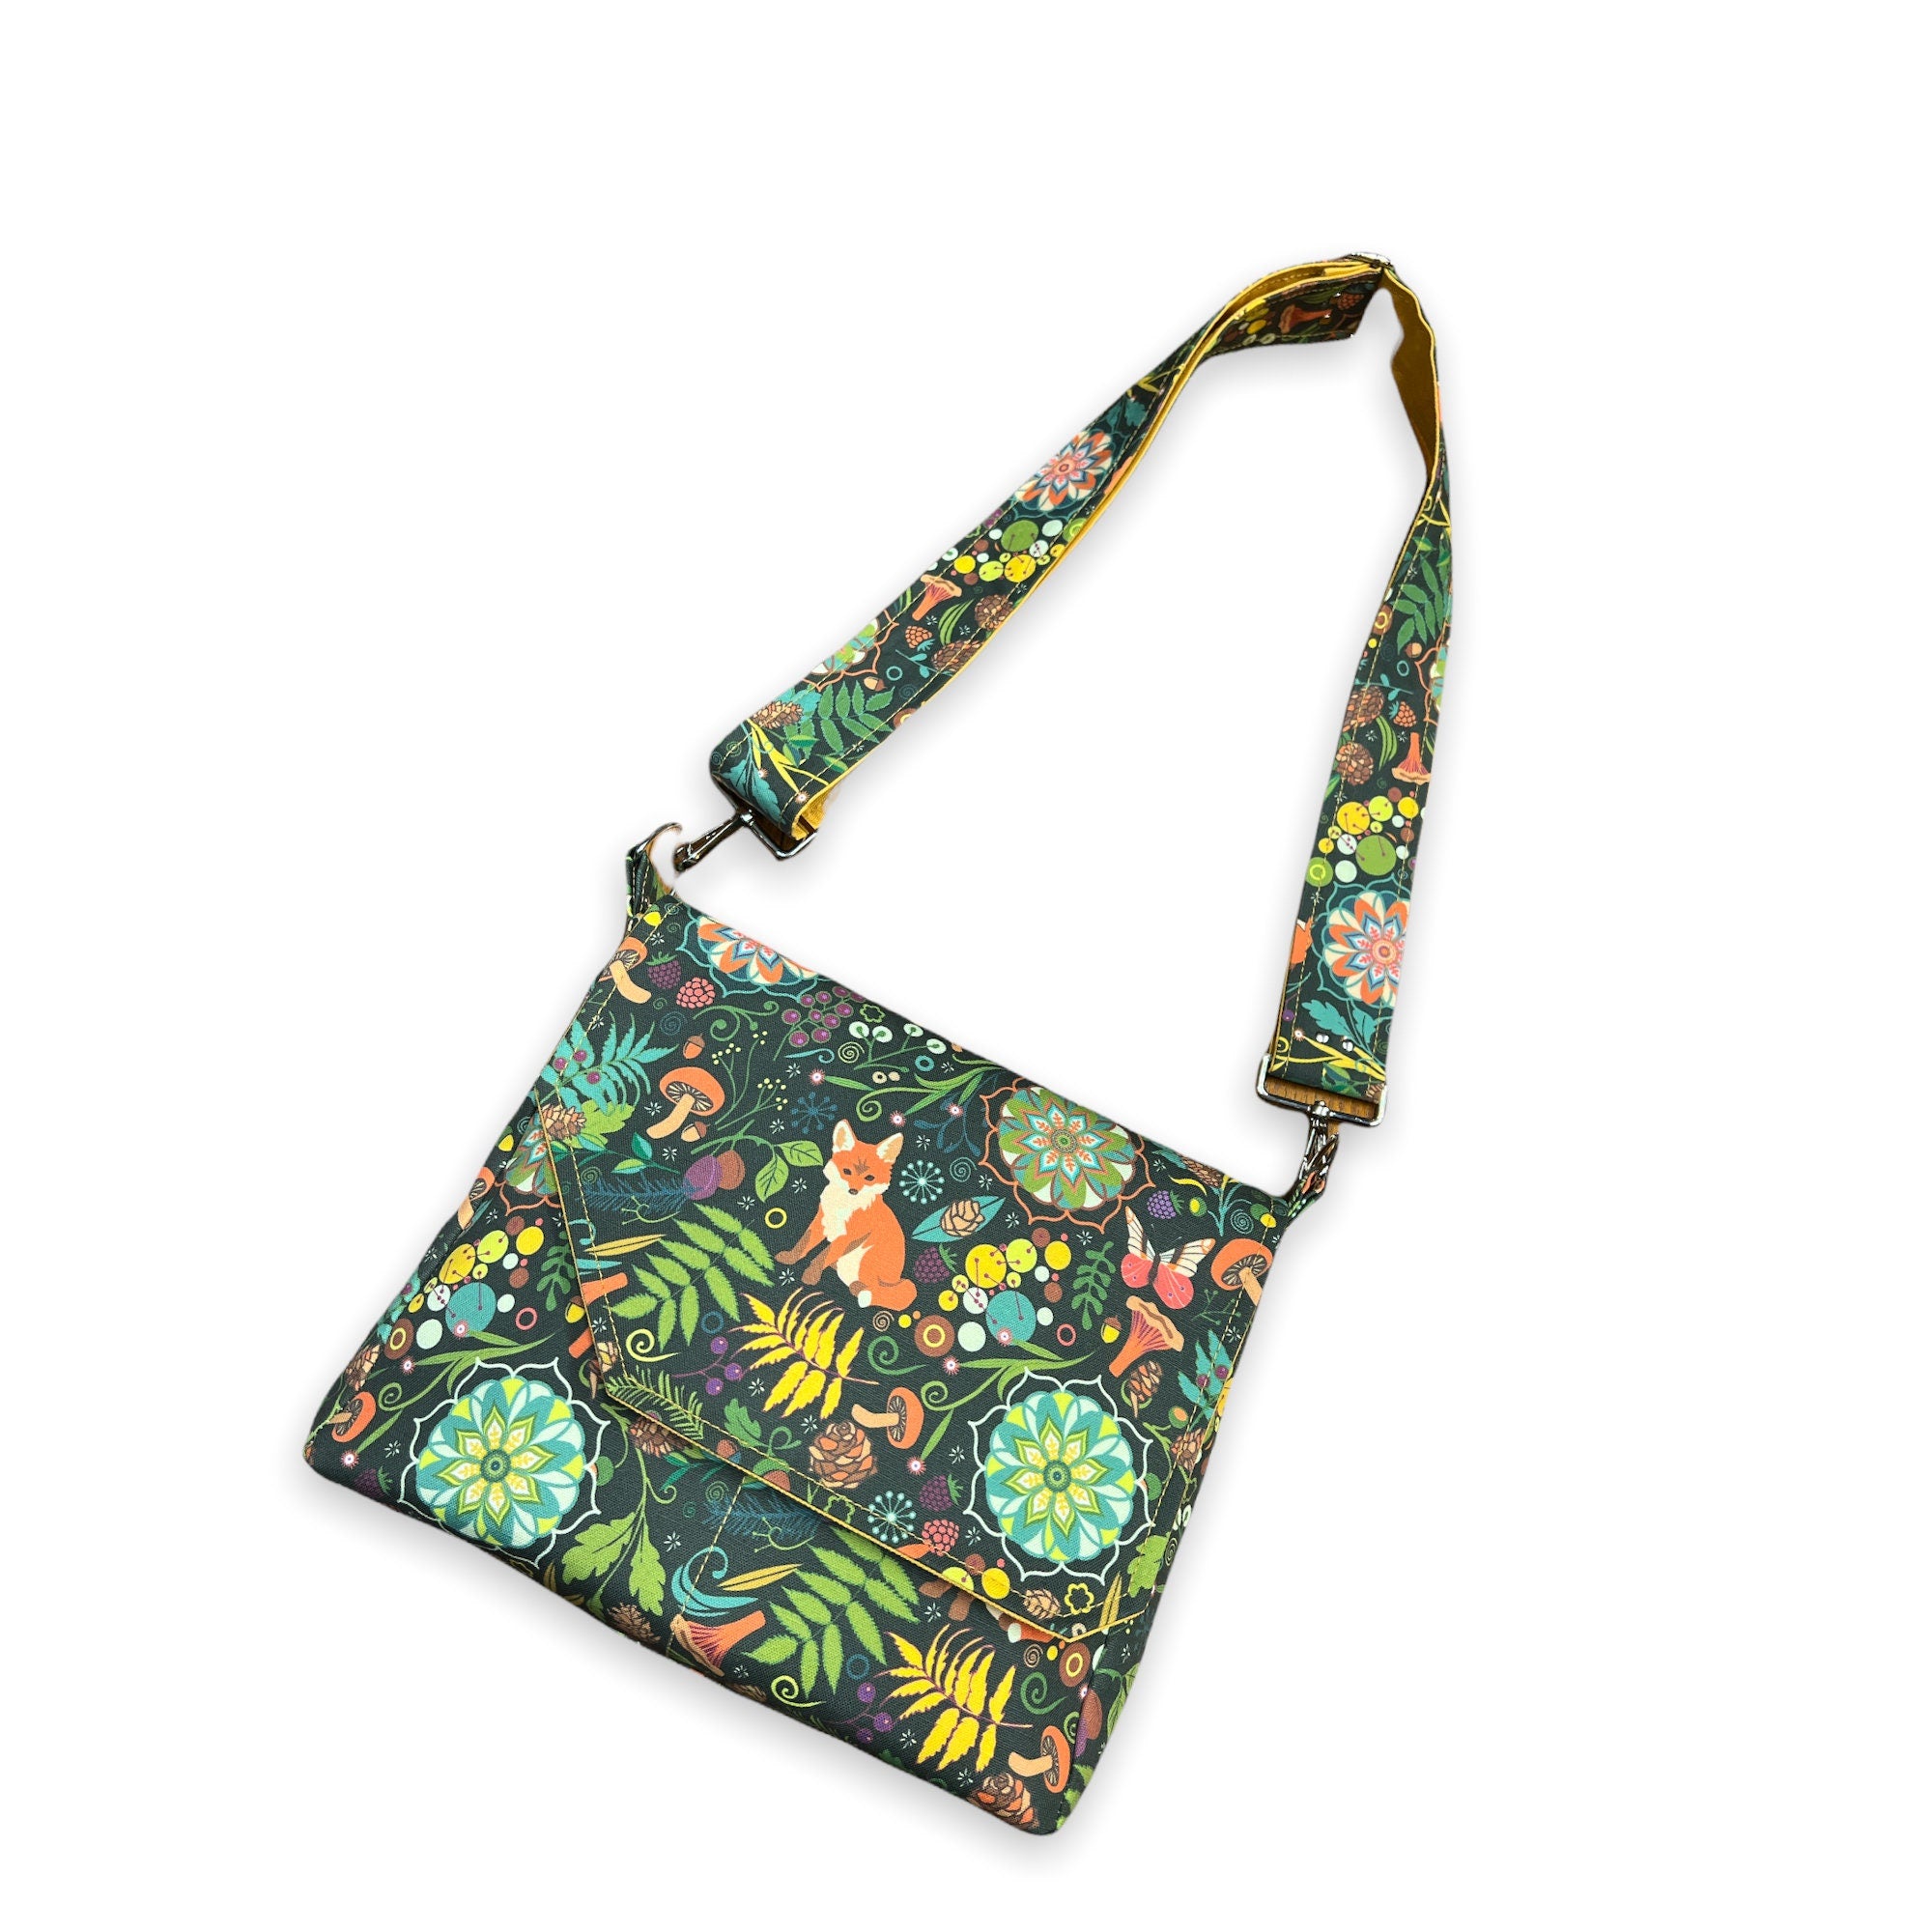 Buy woodland sling bag at Amazon.in